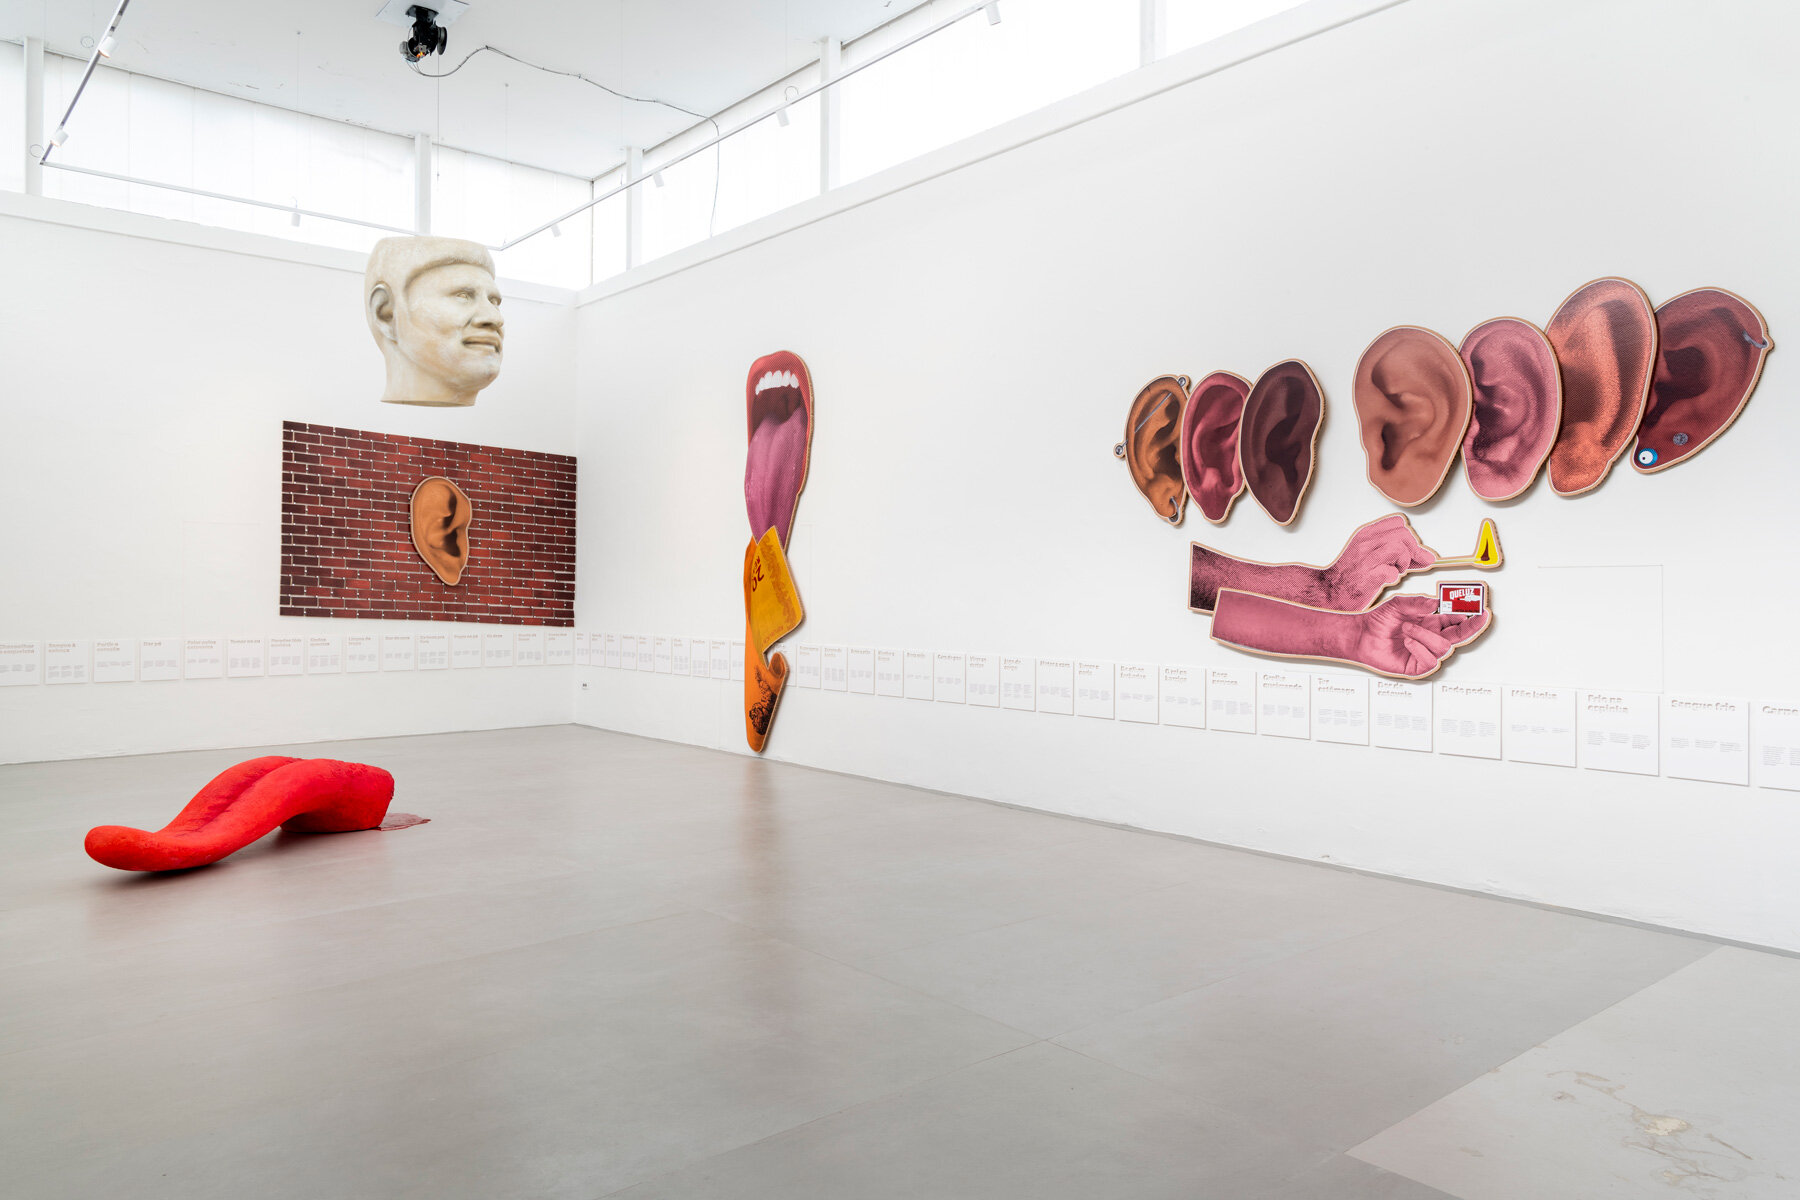 brazil pavilion translates idioms referring to the human body into